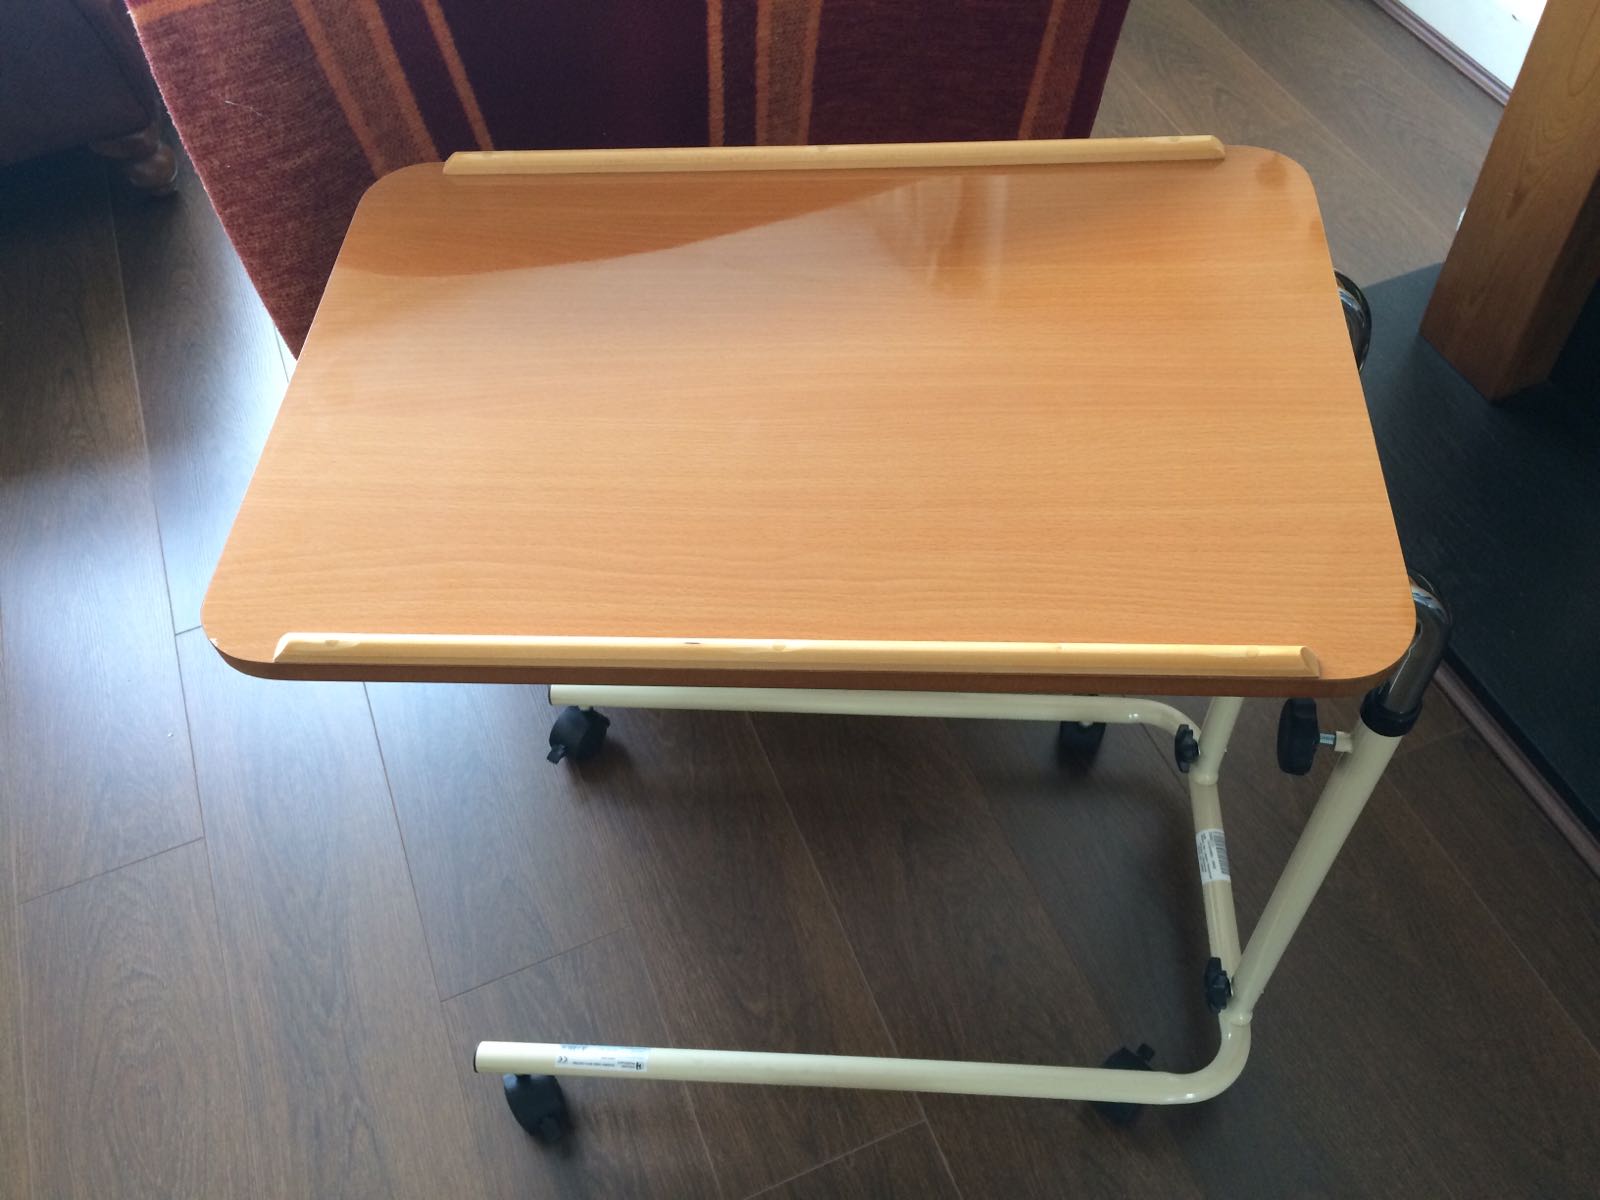 It might be just a table but it's a real handy bit of kit when you can't move from your bed!